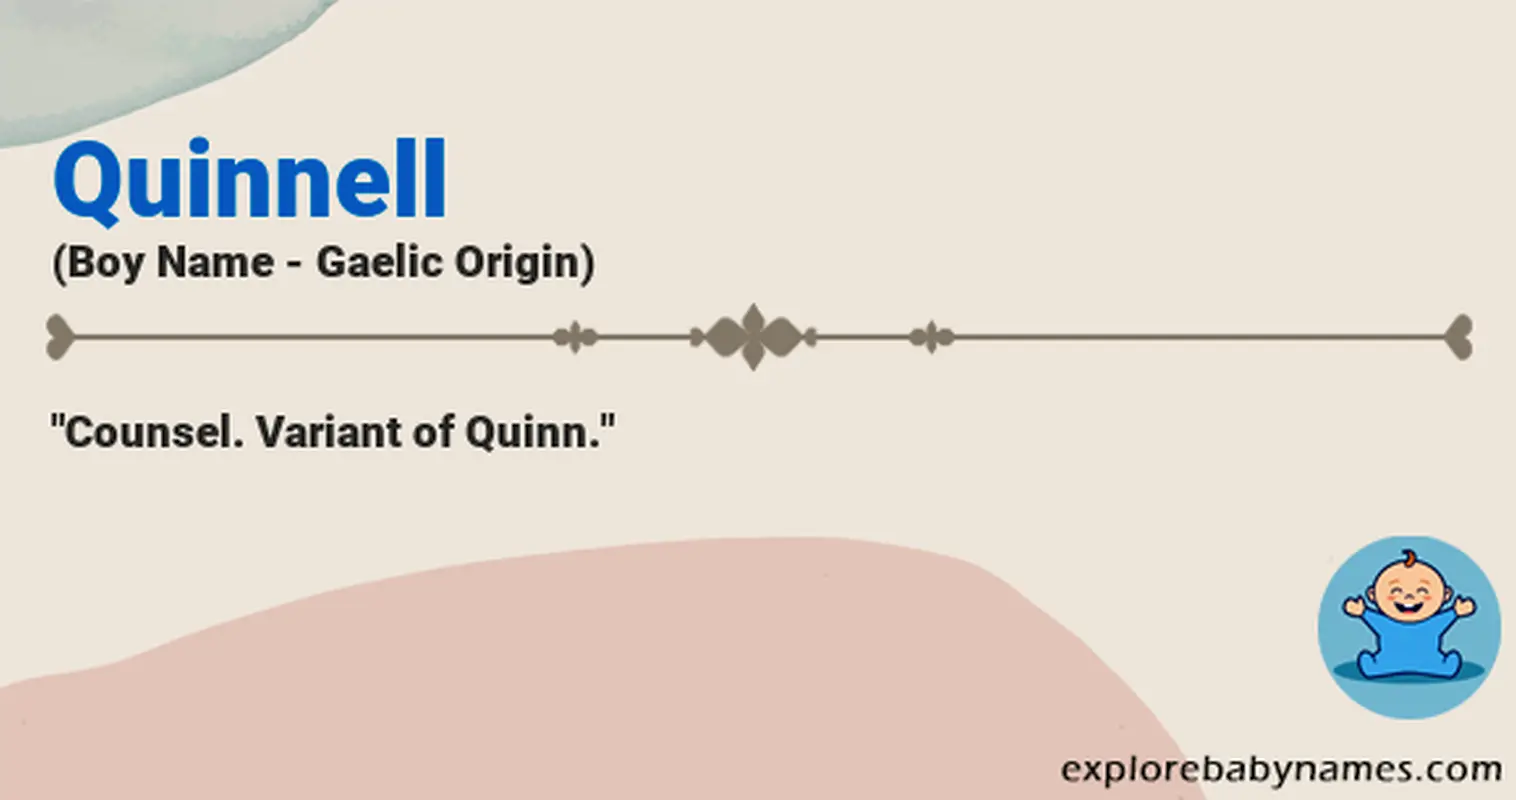 Meaning of Quinnell